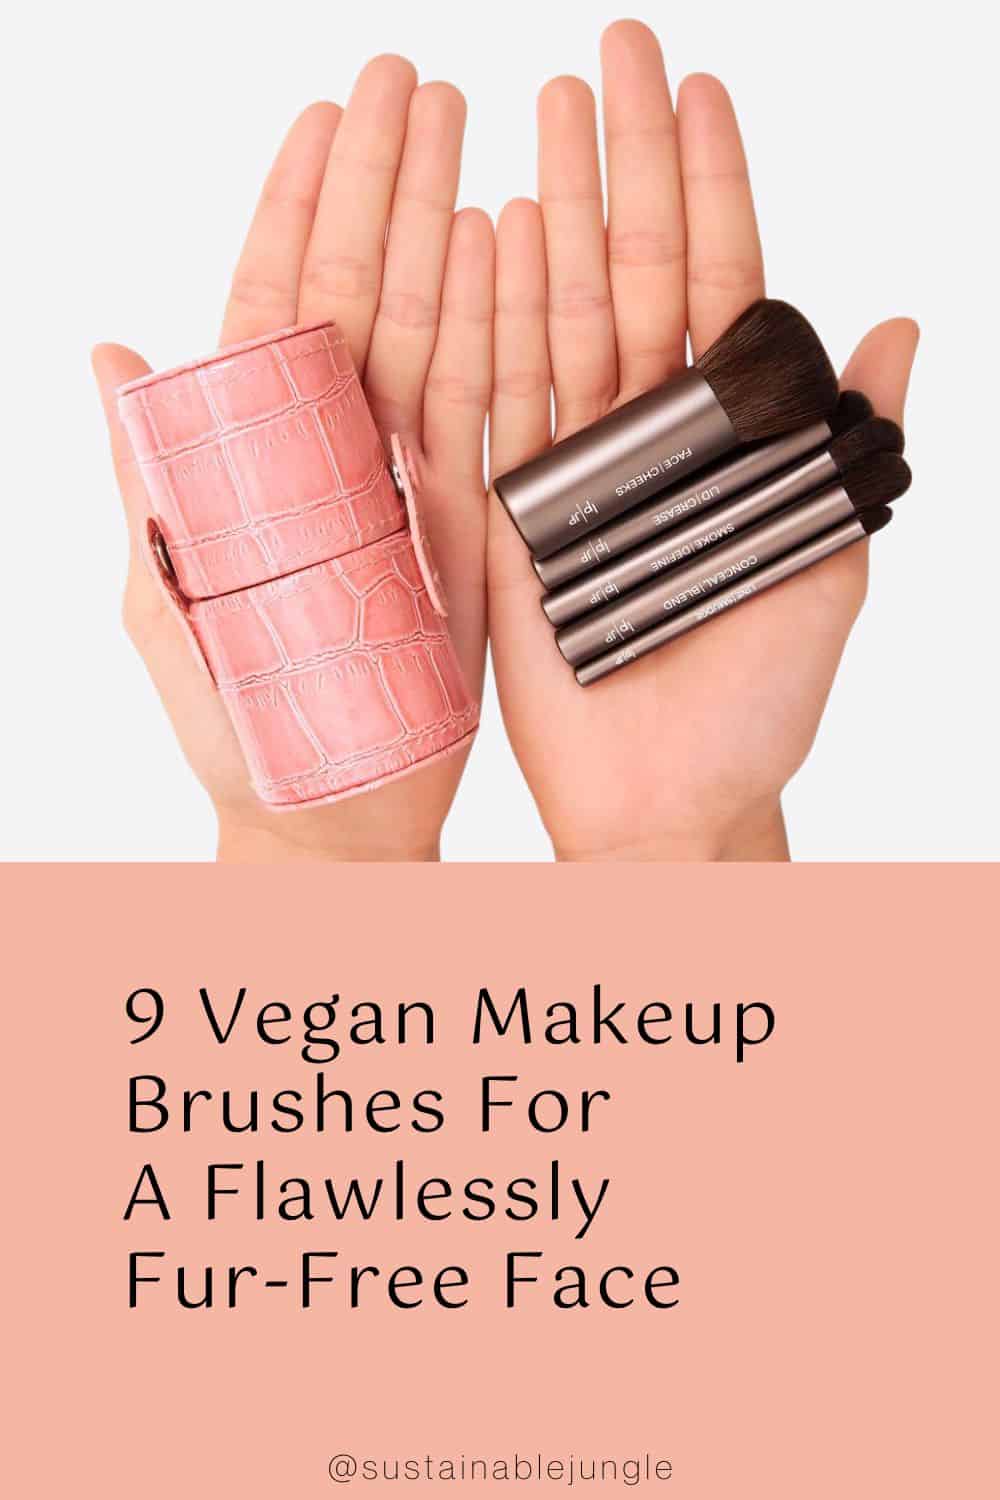 9 Vegan Makeup Brushes For A Flawlessly Fur-Free Face Image by Jenny Patinkin #veganmakeupbrushes #veganmakeupbrushset #bestveganmakeupbrushes #ecomakeupbrushes #ecofriendlymakeupbrushes #sustainablejungle